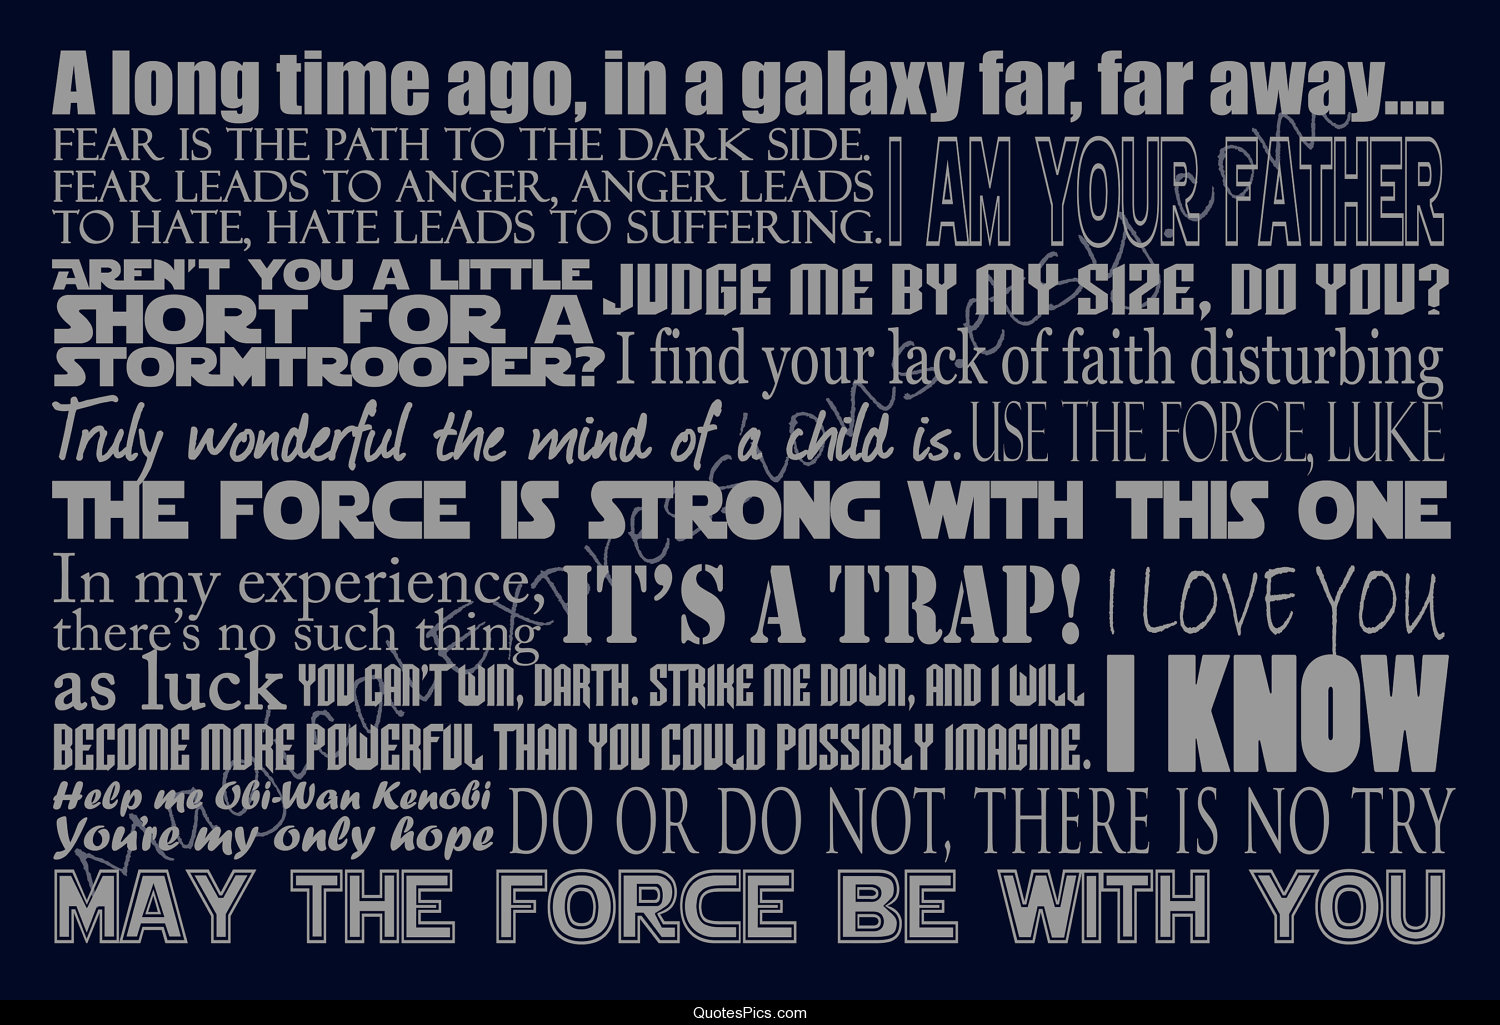 Star Wars Farewell Quotes. QuotesGram1500 x 1025